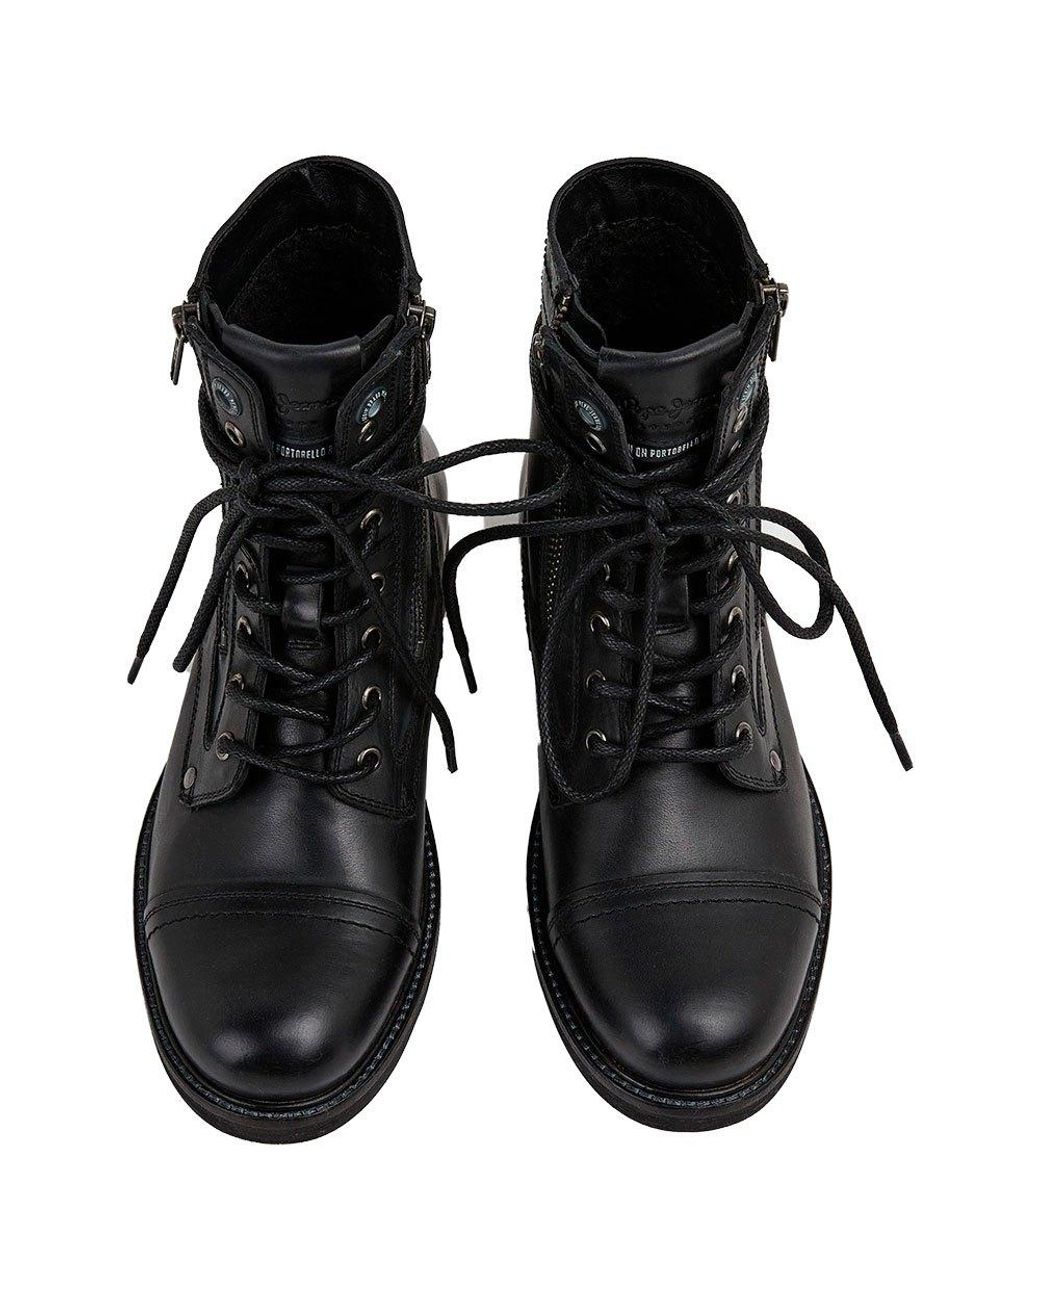 Pepe Jeans Melting Combat Warm Boots in Black | Lyst